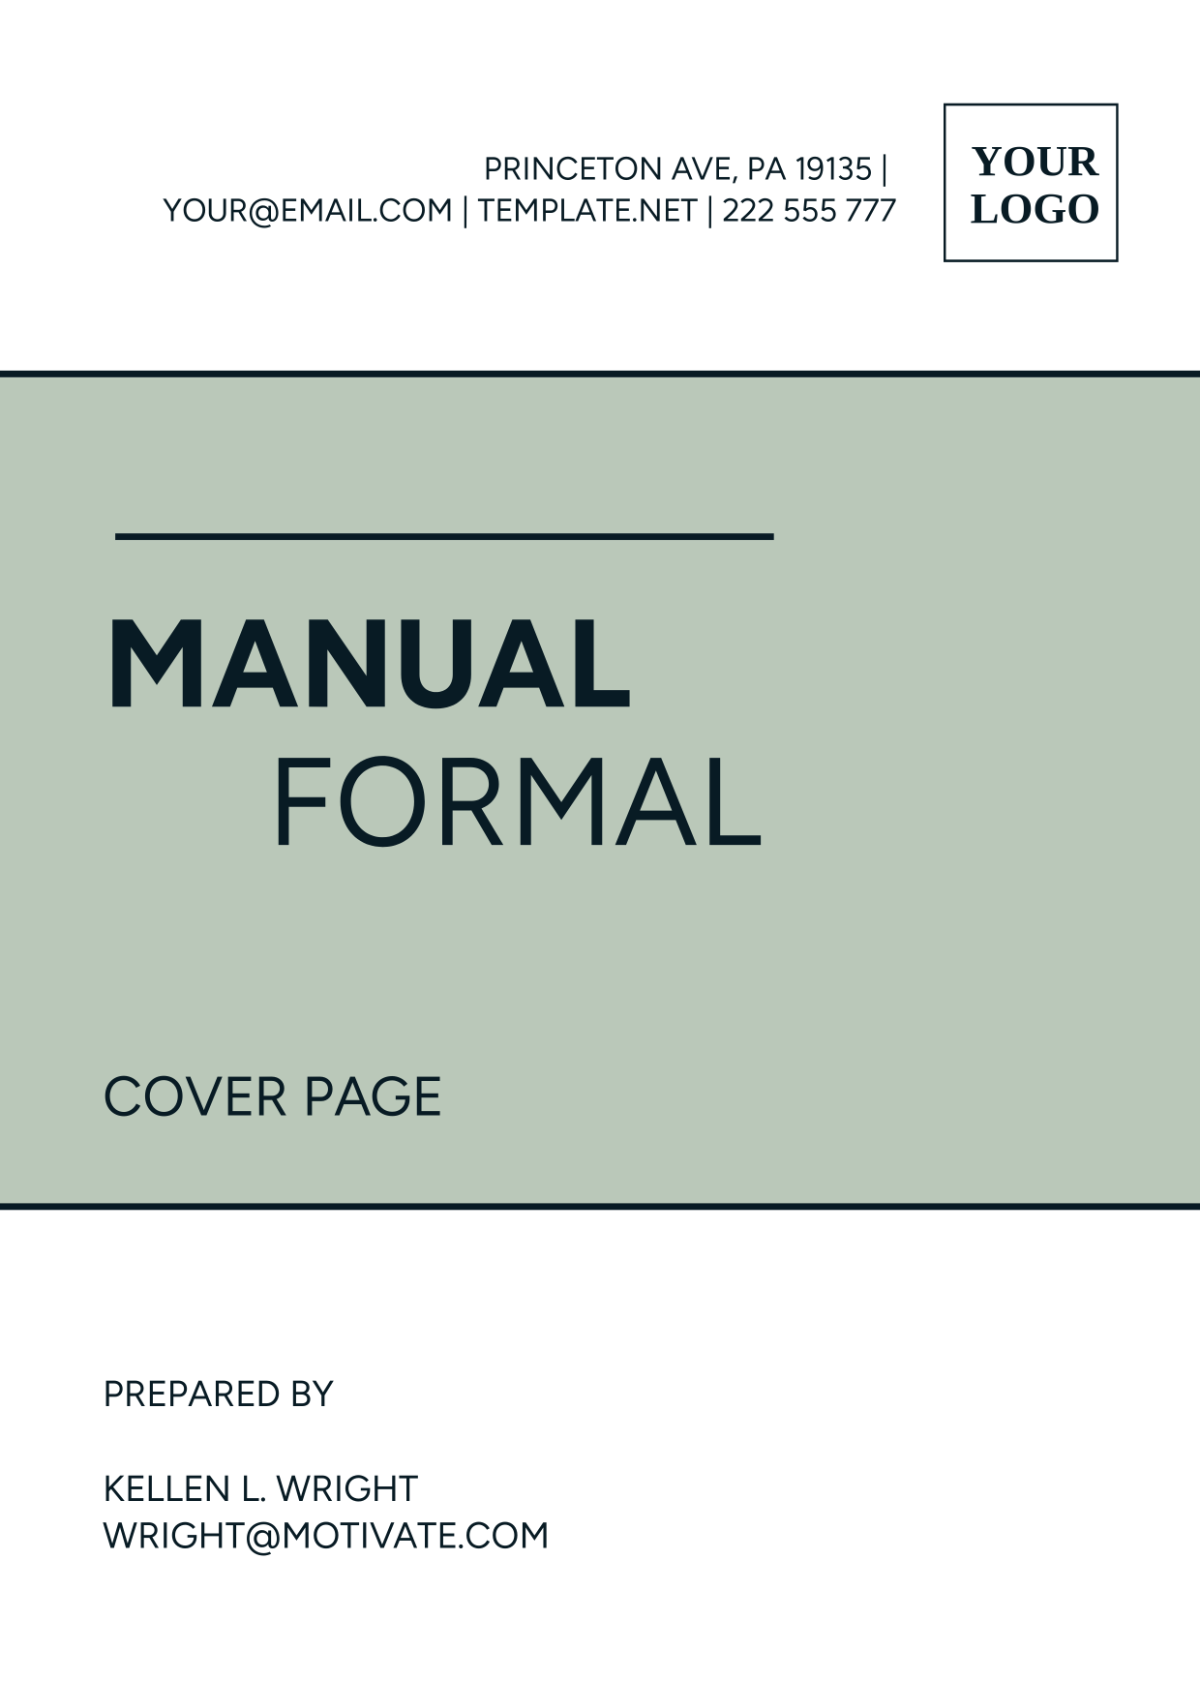 Manual Formal Cover Page